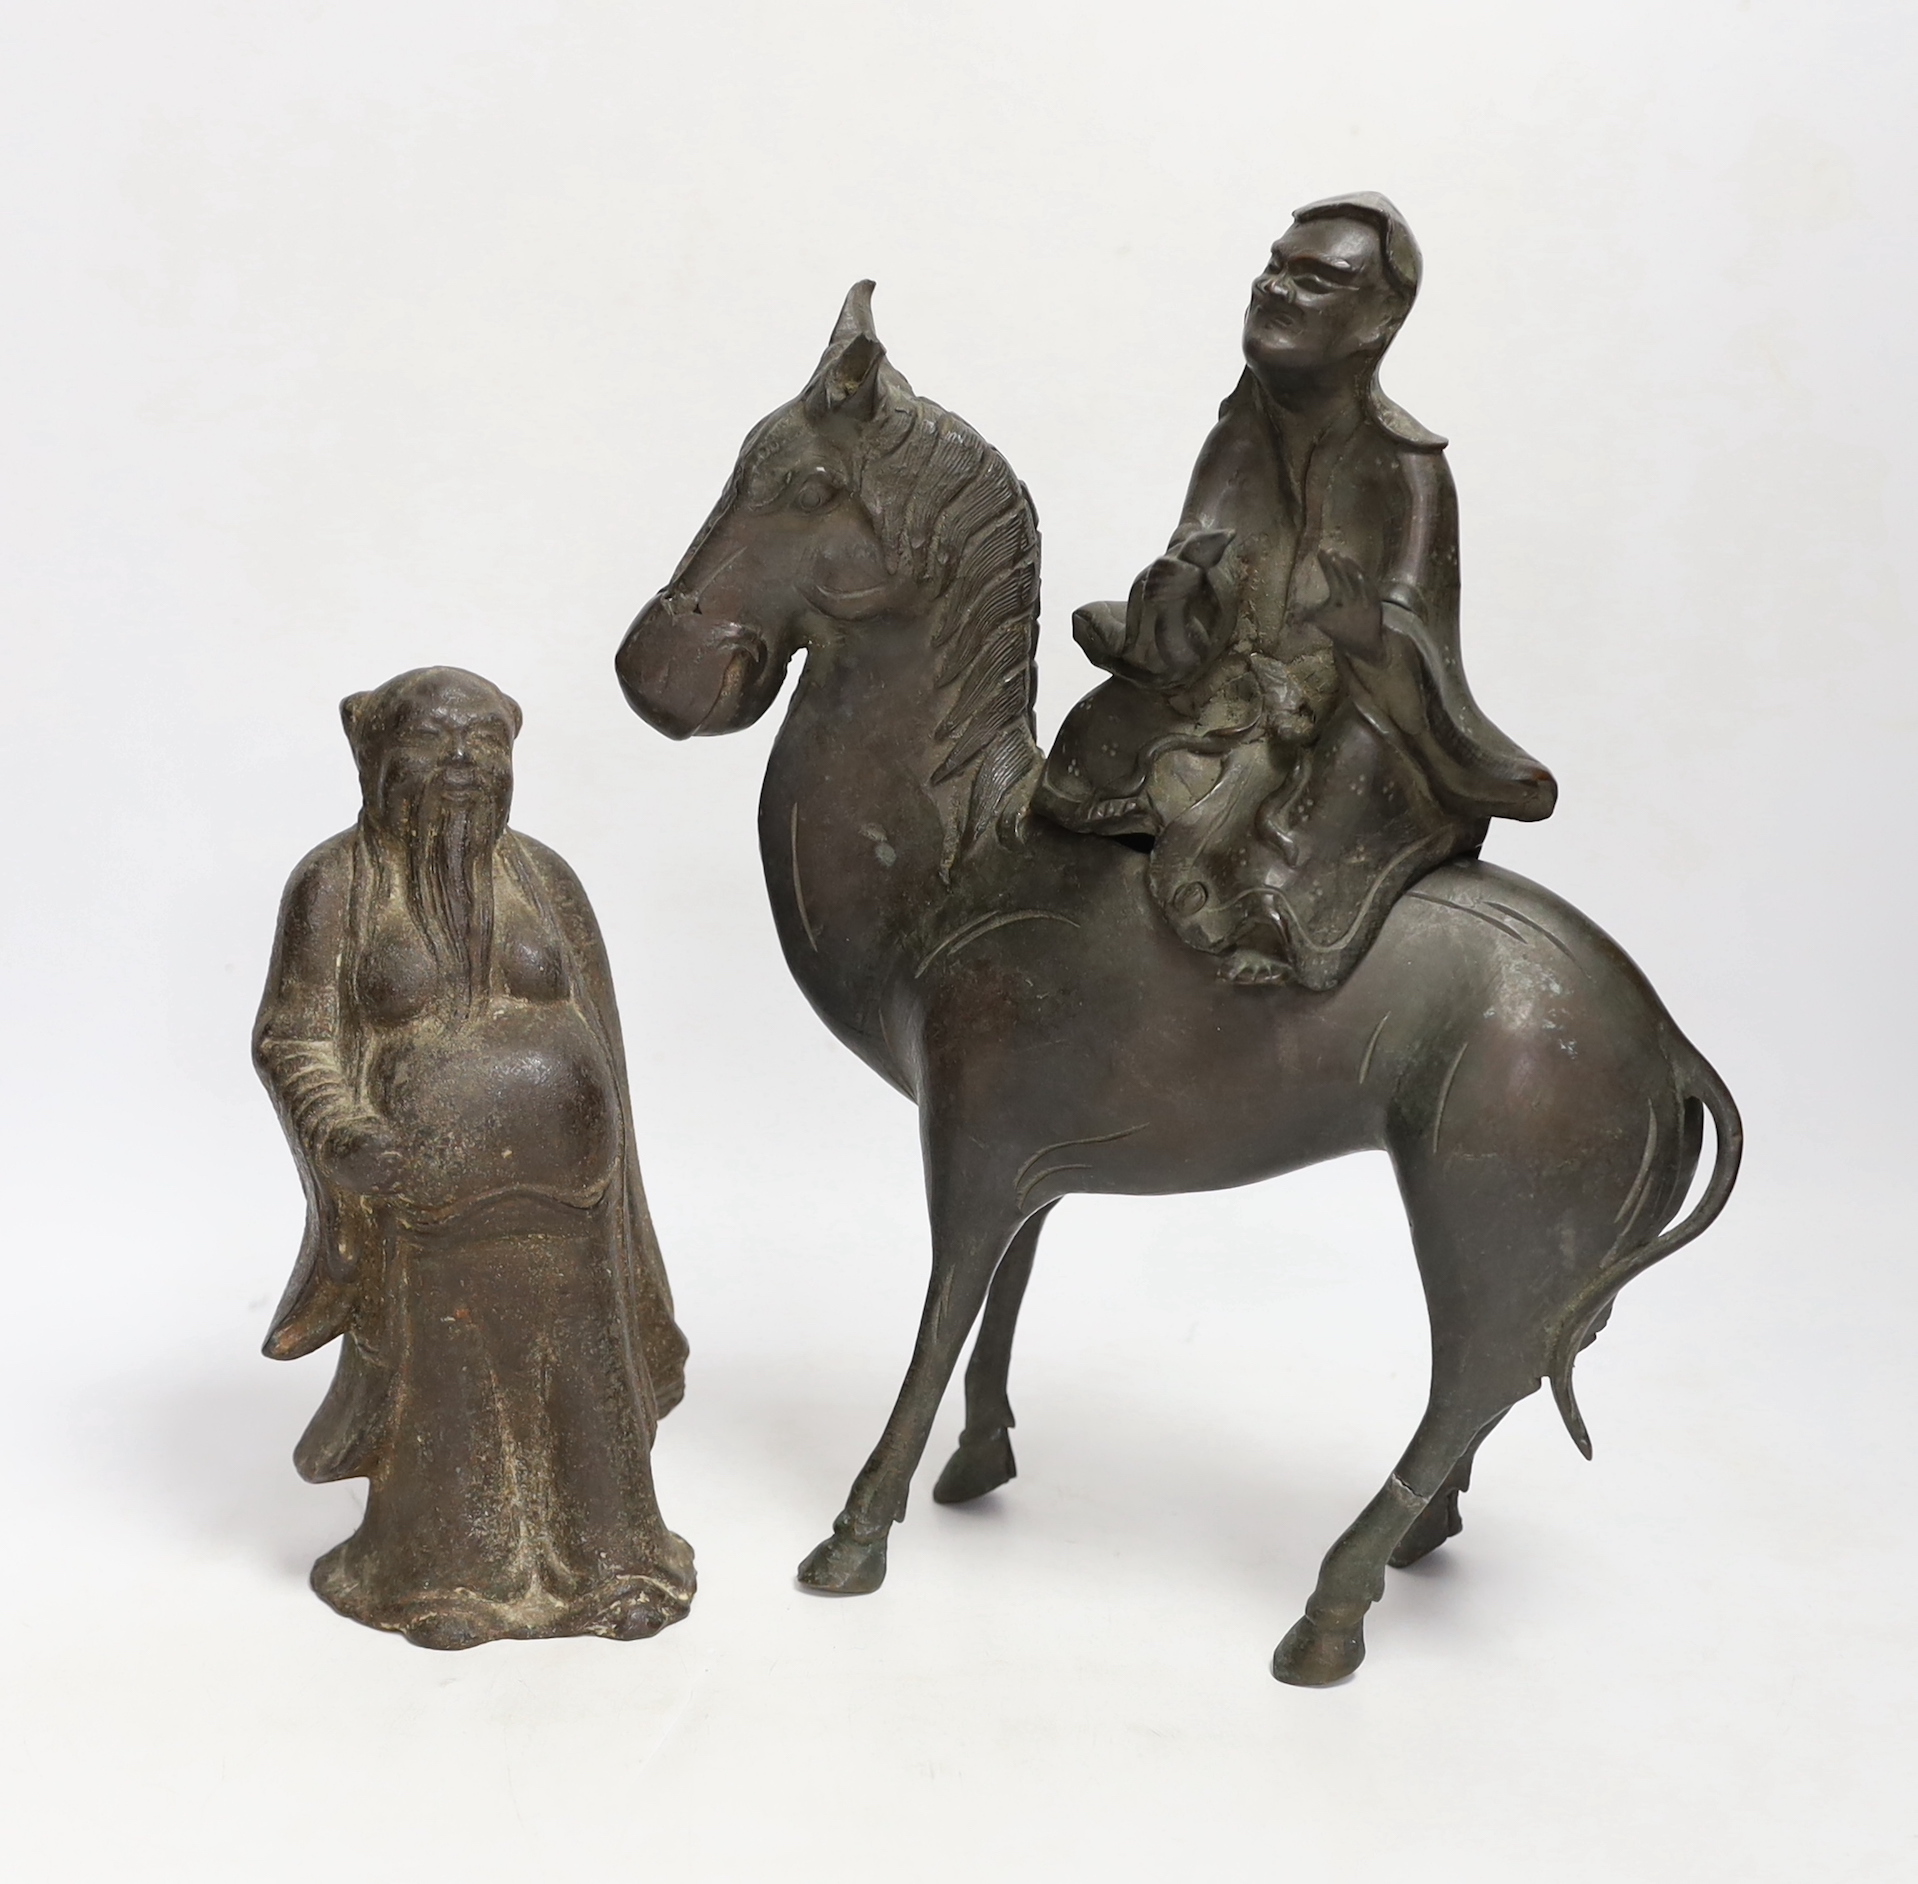 Two Chinese bronze figures; a luohan on his mule and a figure of a wise man, tallest 30cm